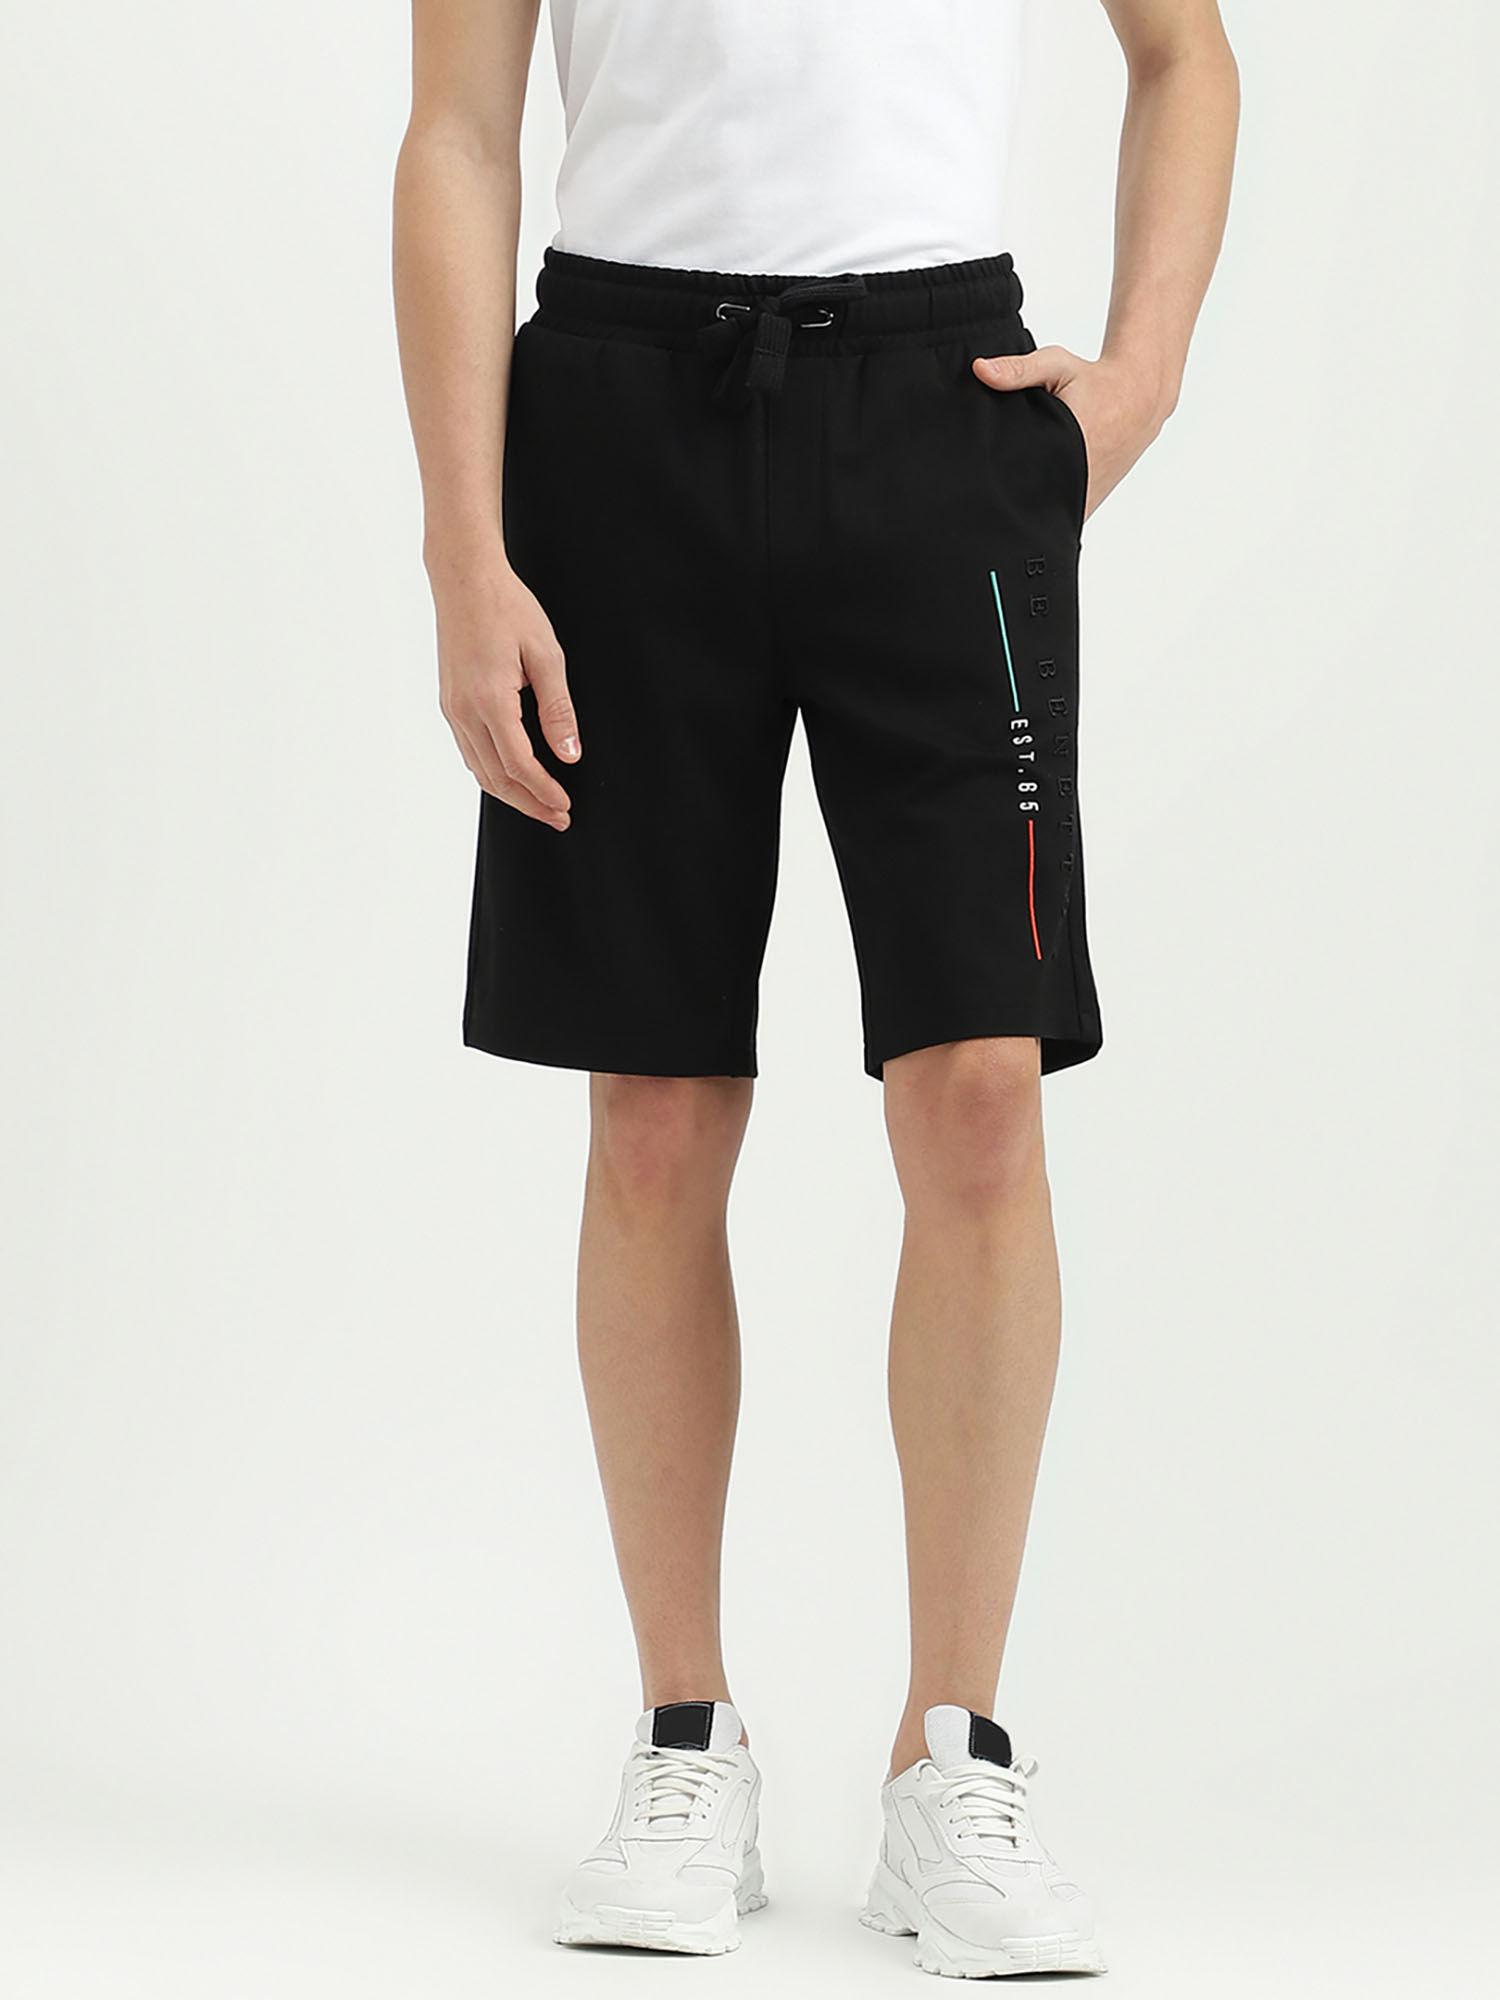 embroidered-regular-fit-mid-waist-shorts